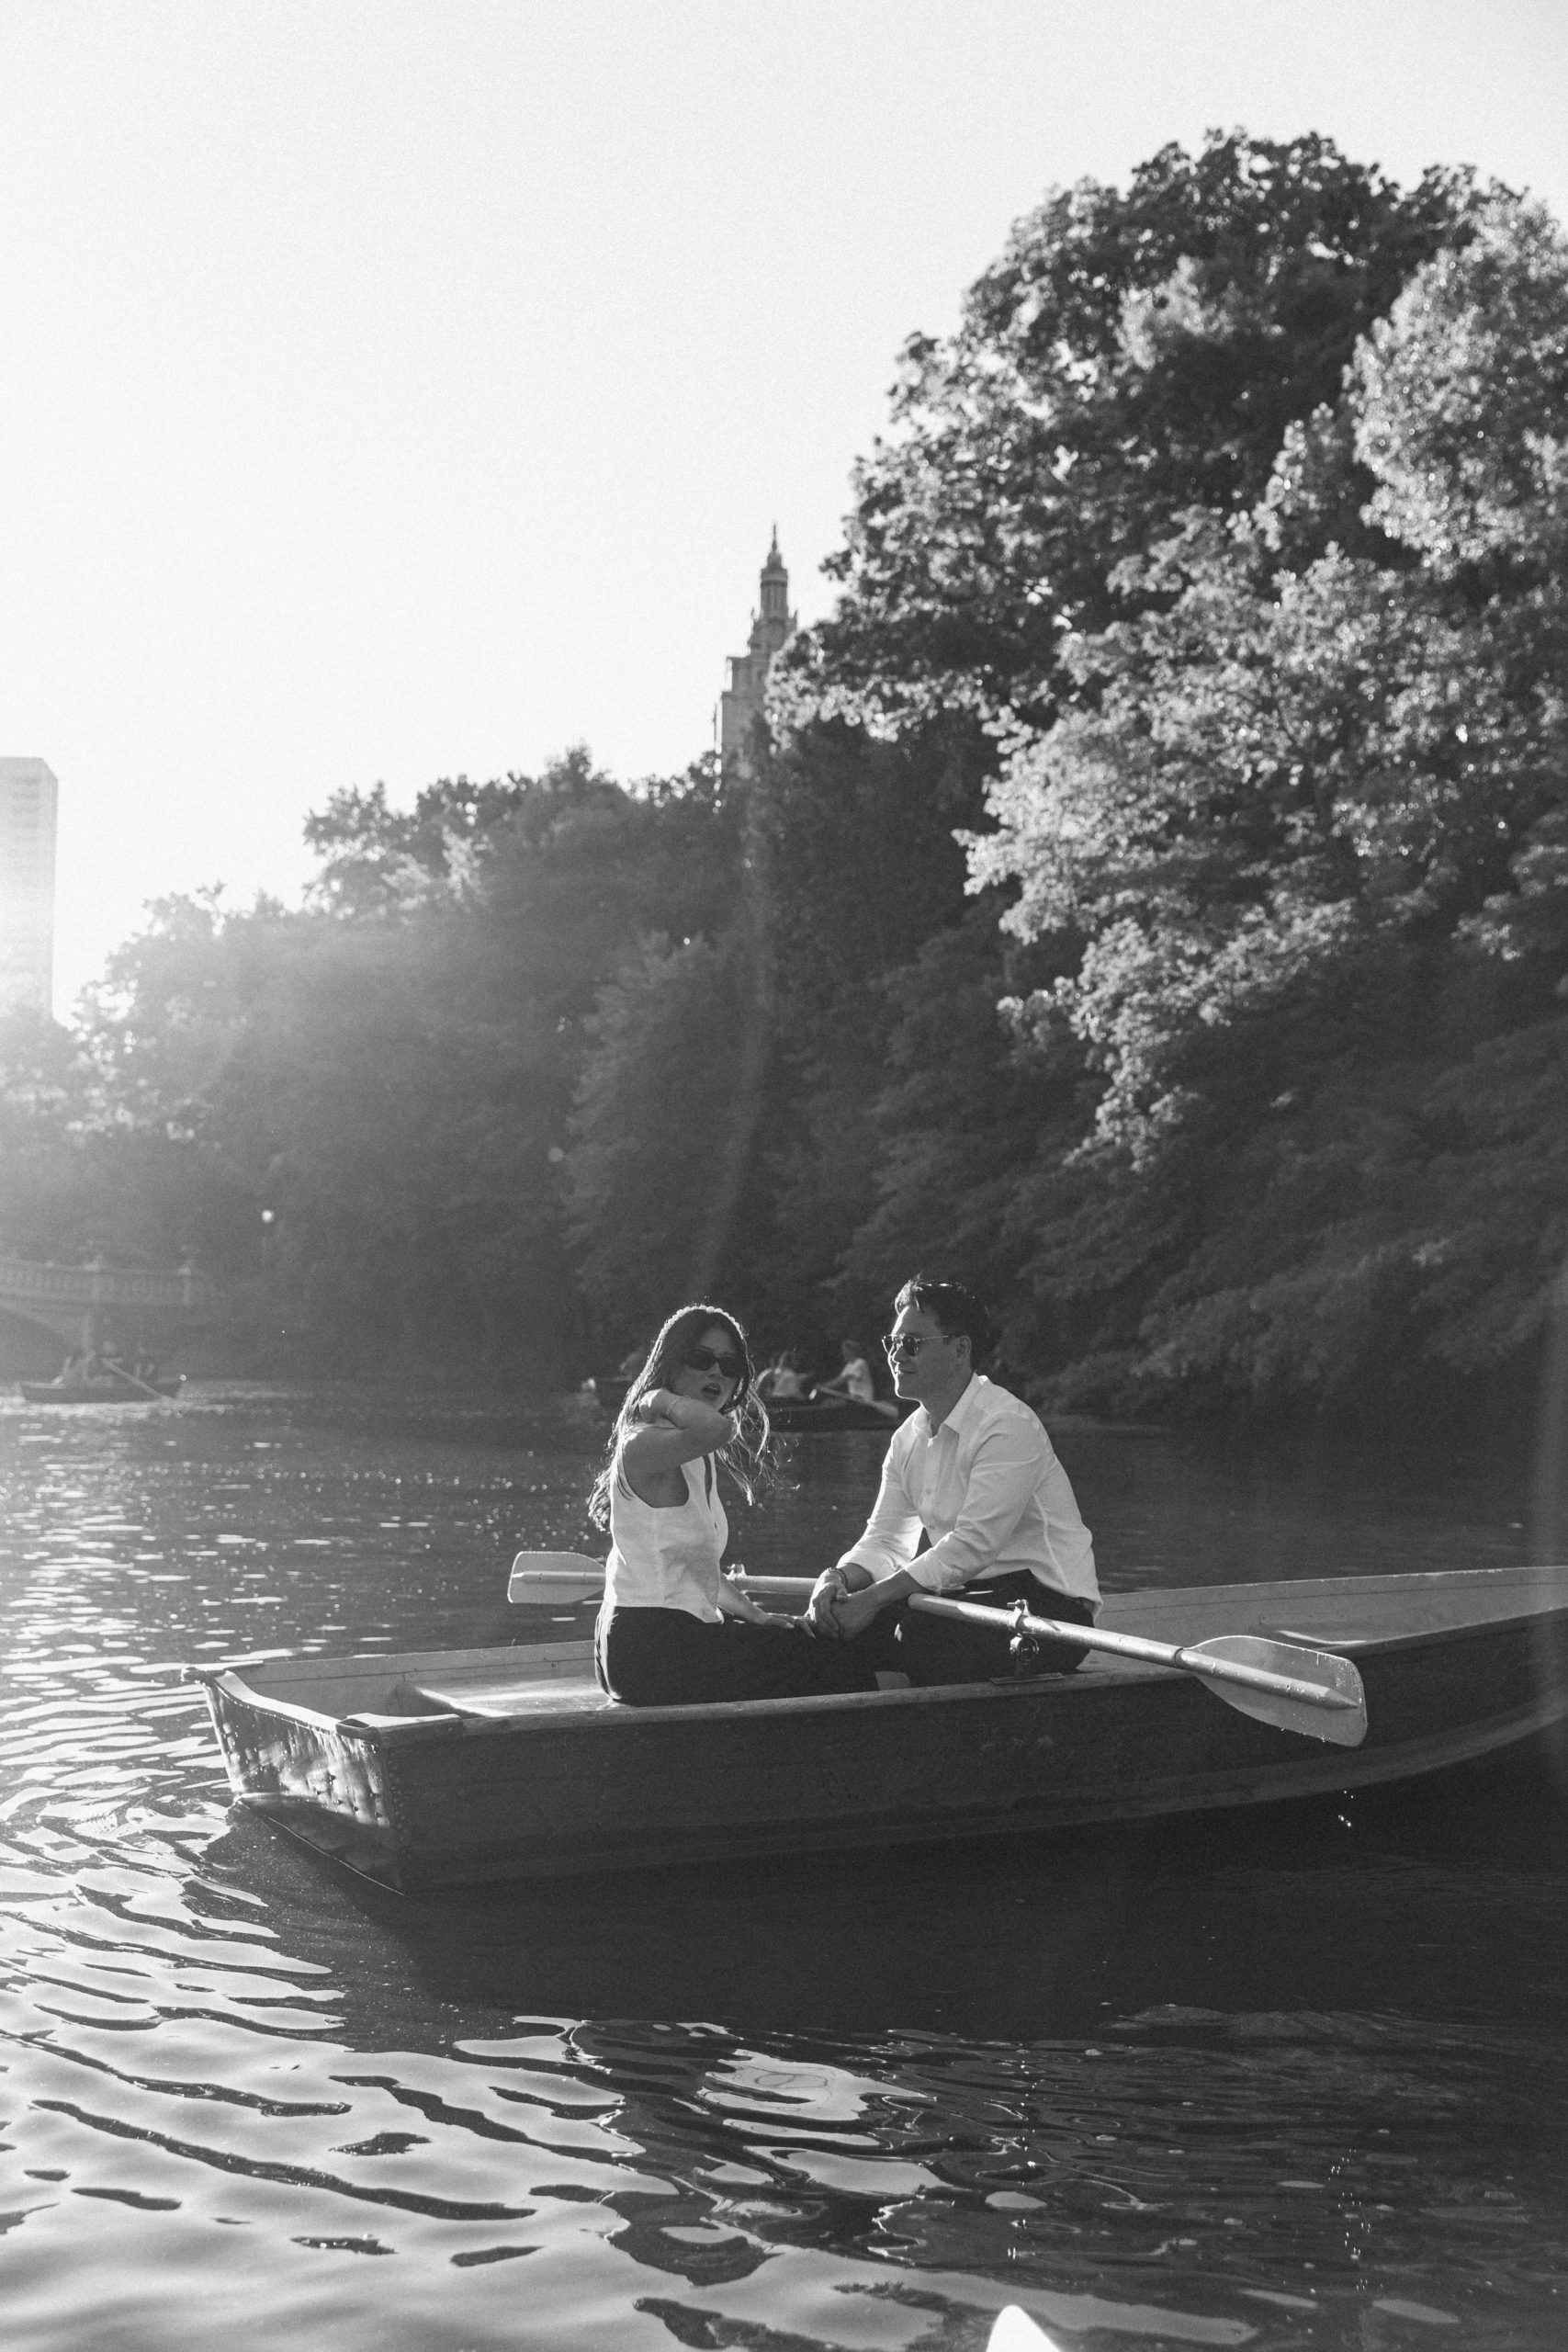 Angela and Grant in a boat